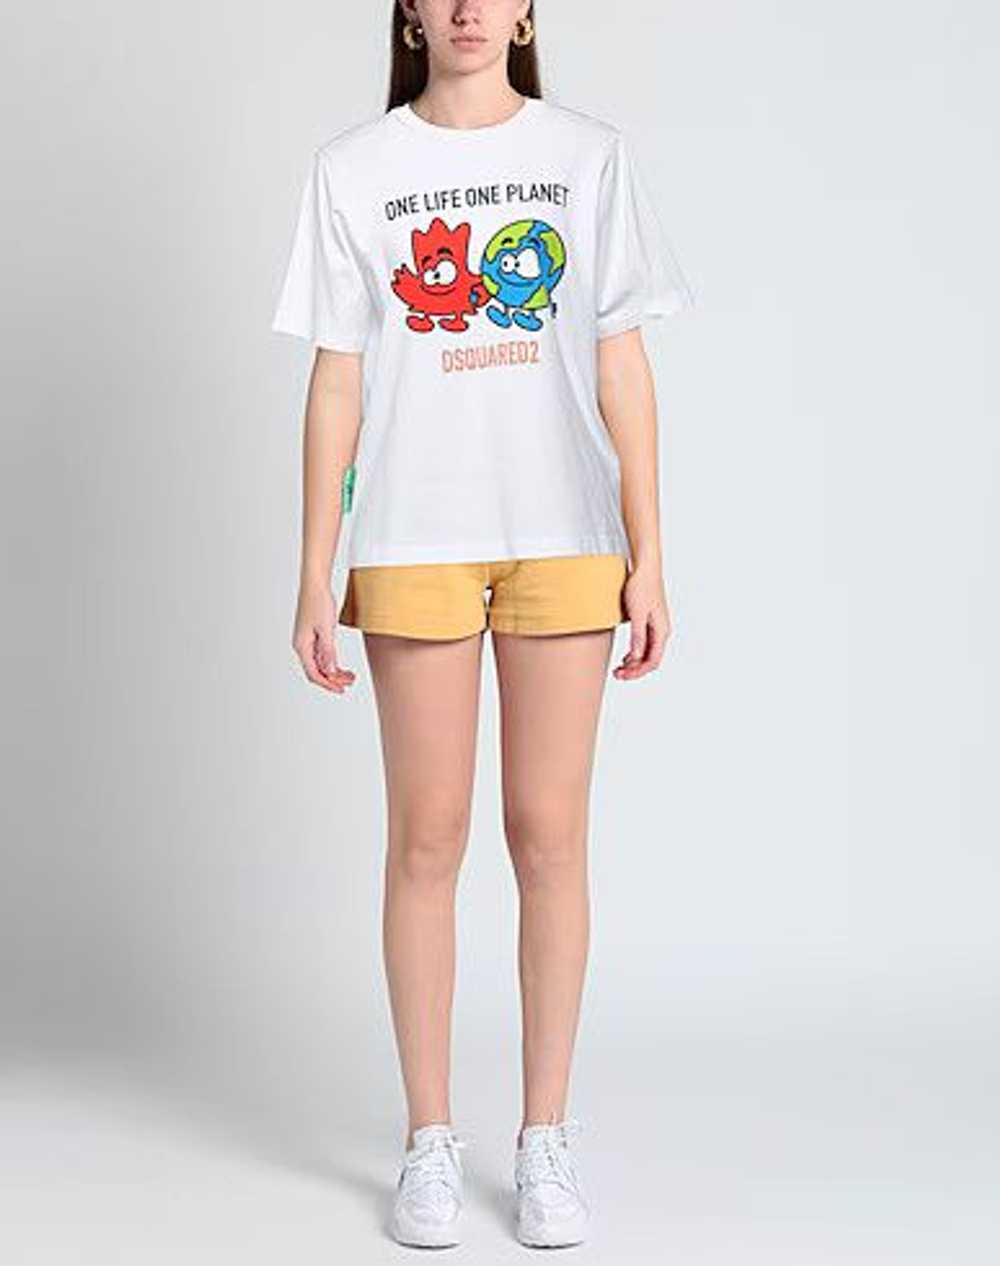 Dsquared2 o1lxy1mk0624 T-Shirt in White - image 2